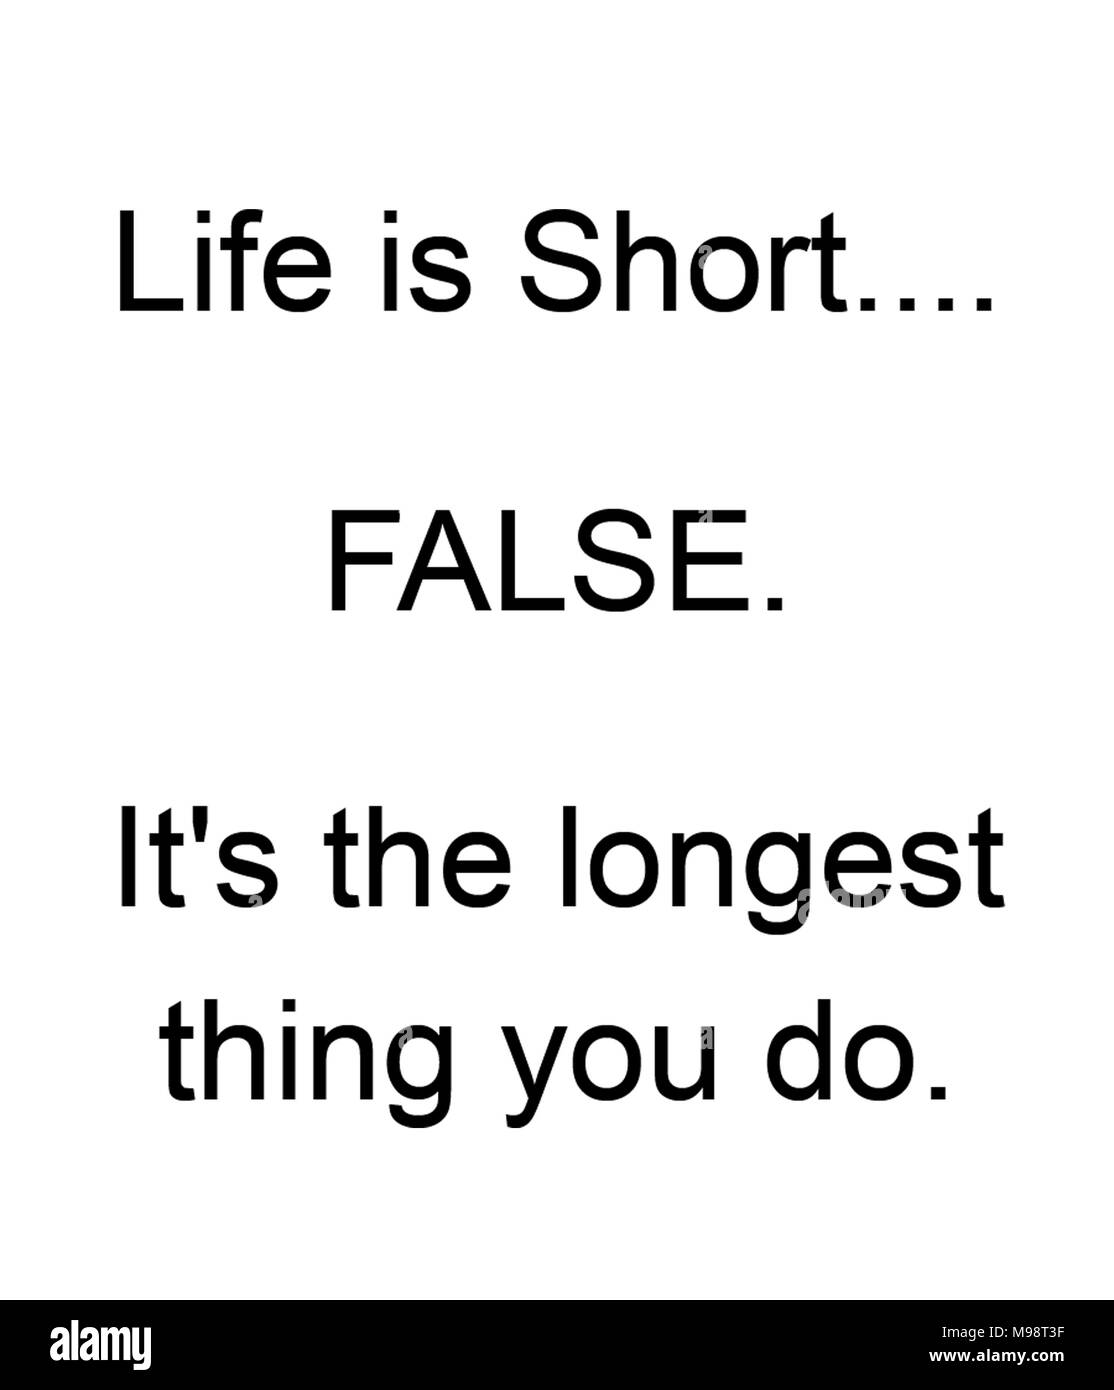 Life Is Short.... FALSE. It's the longest thing you do. Stock Photo